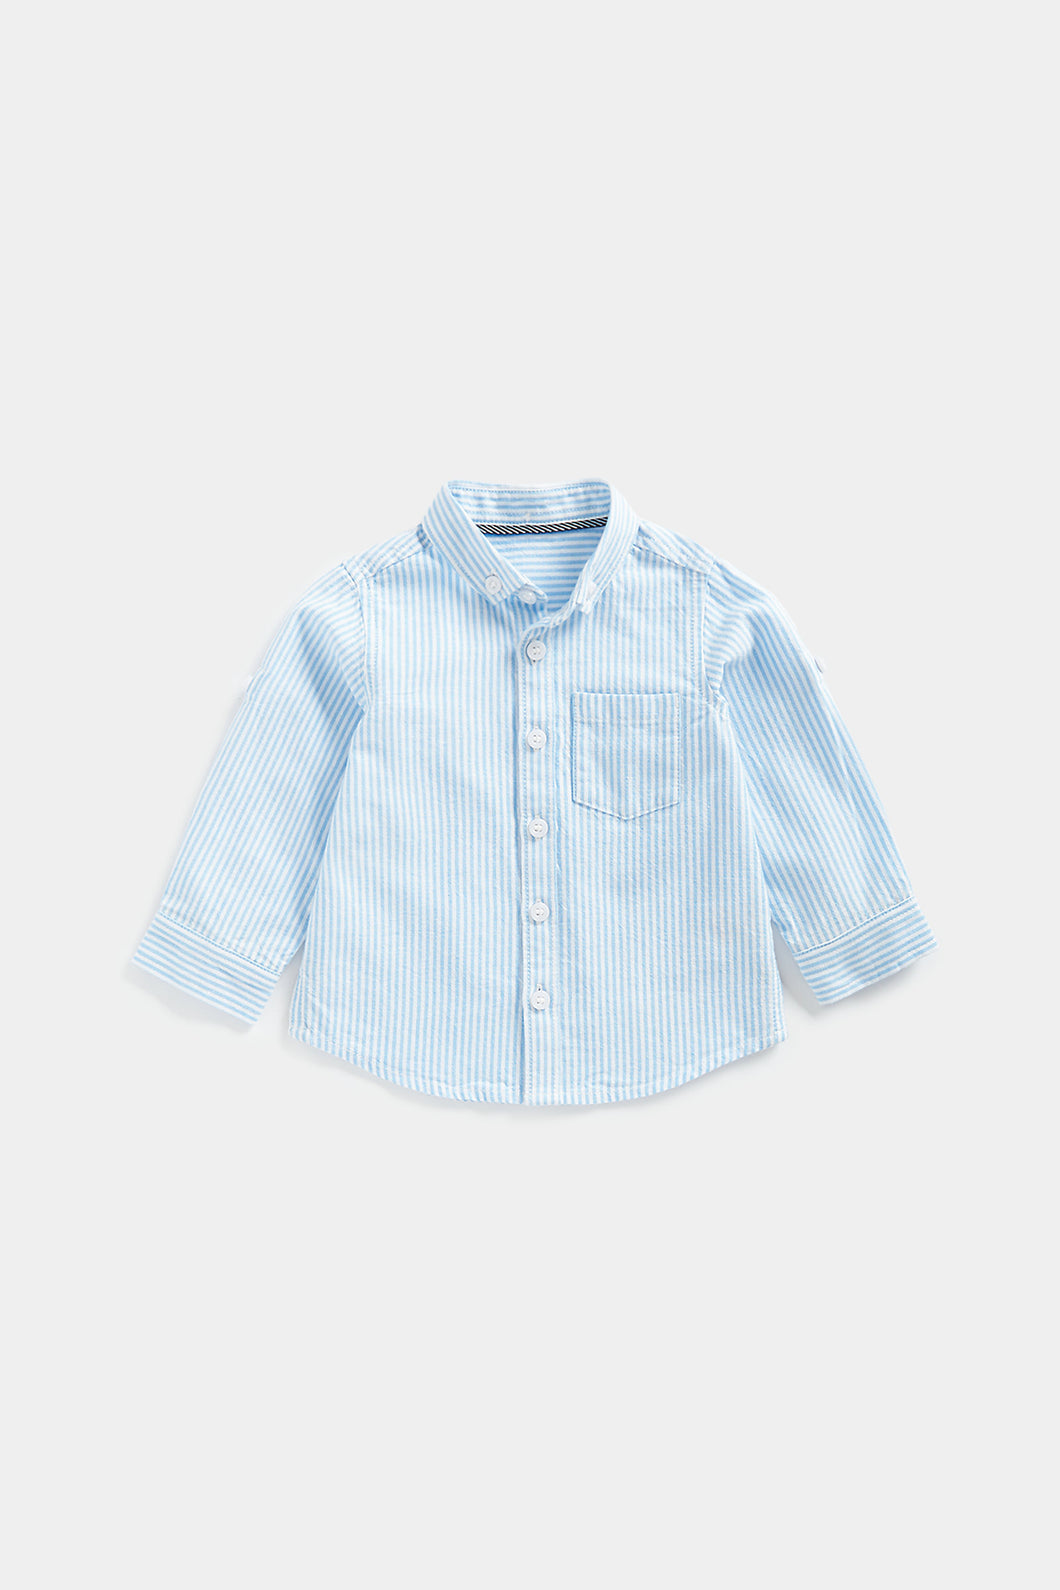 Mothercare Striped Cotton Shirt